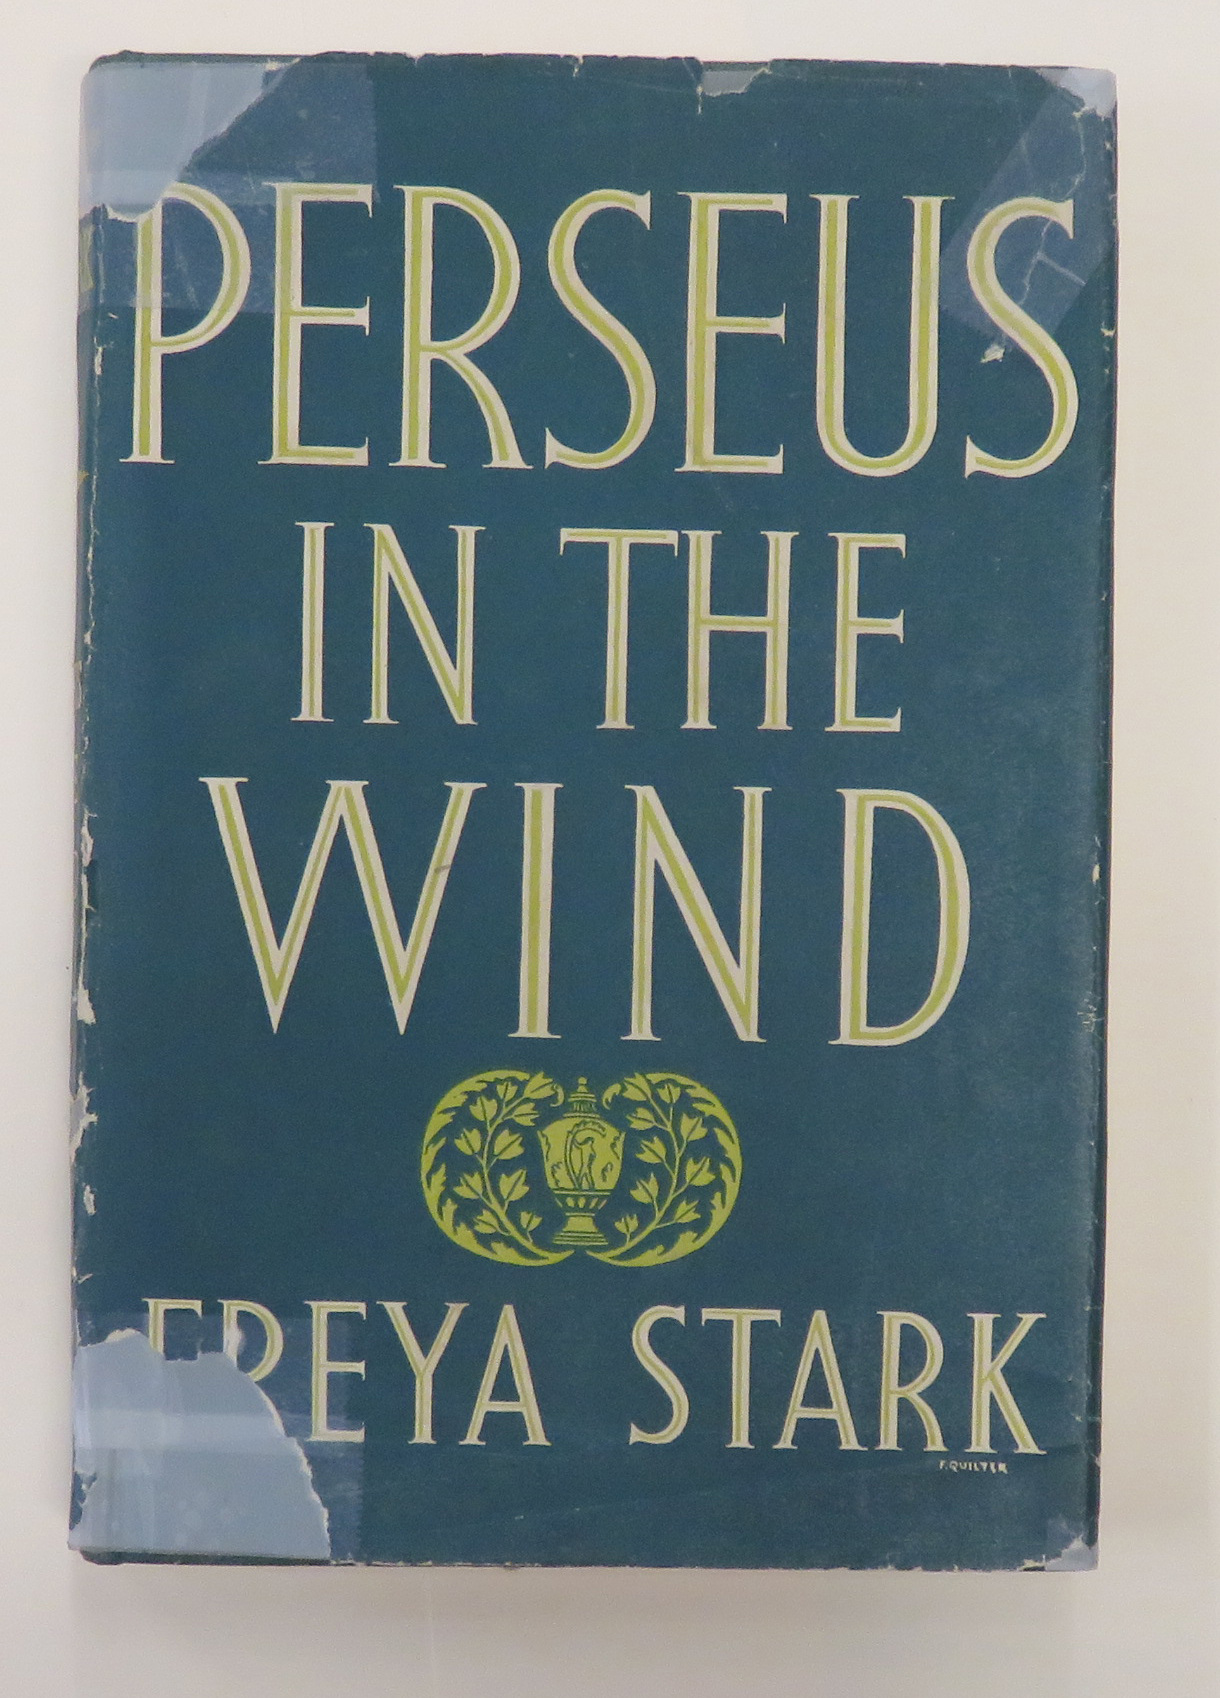 Perseus in the Wind